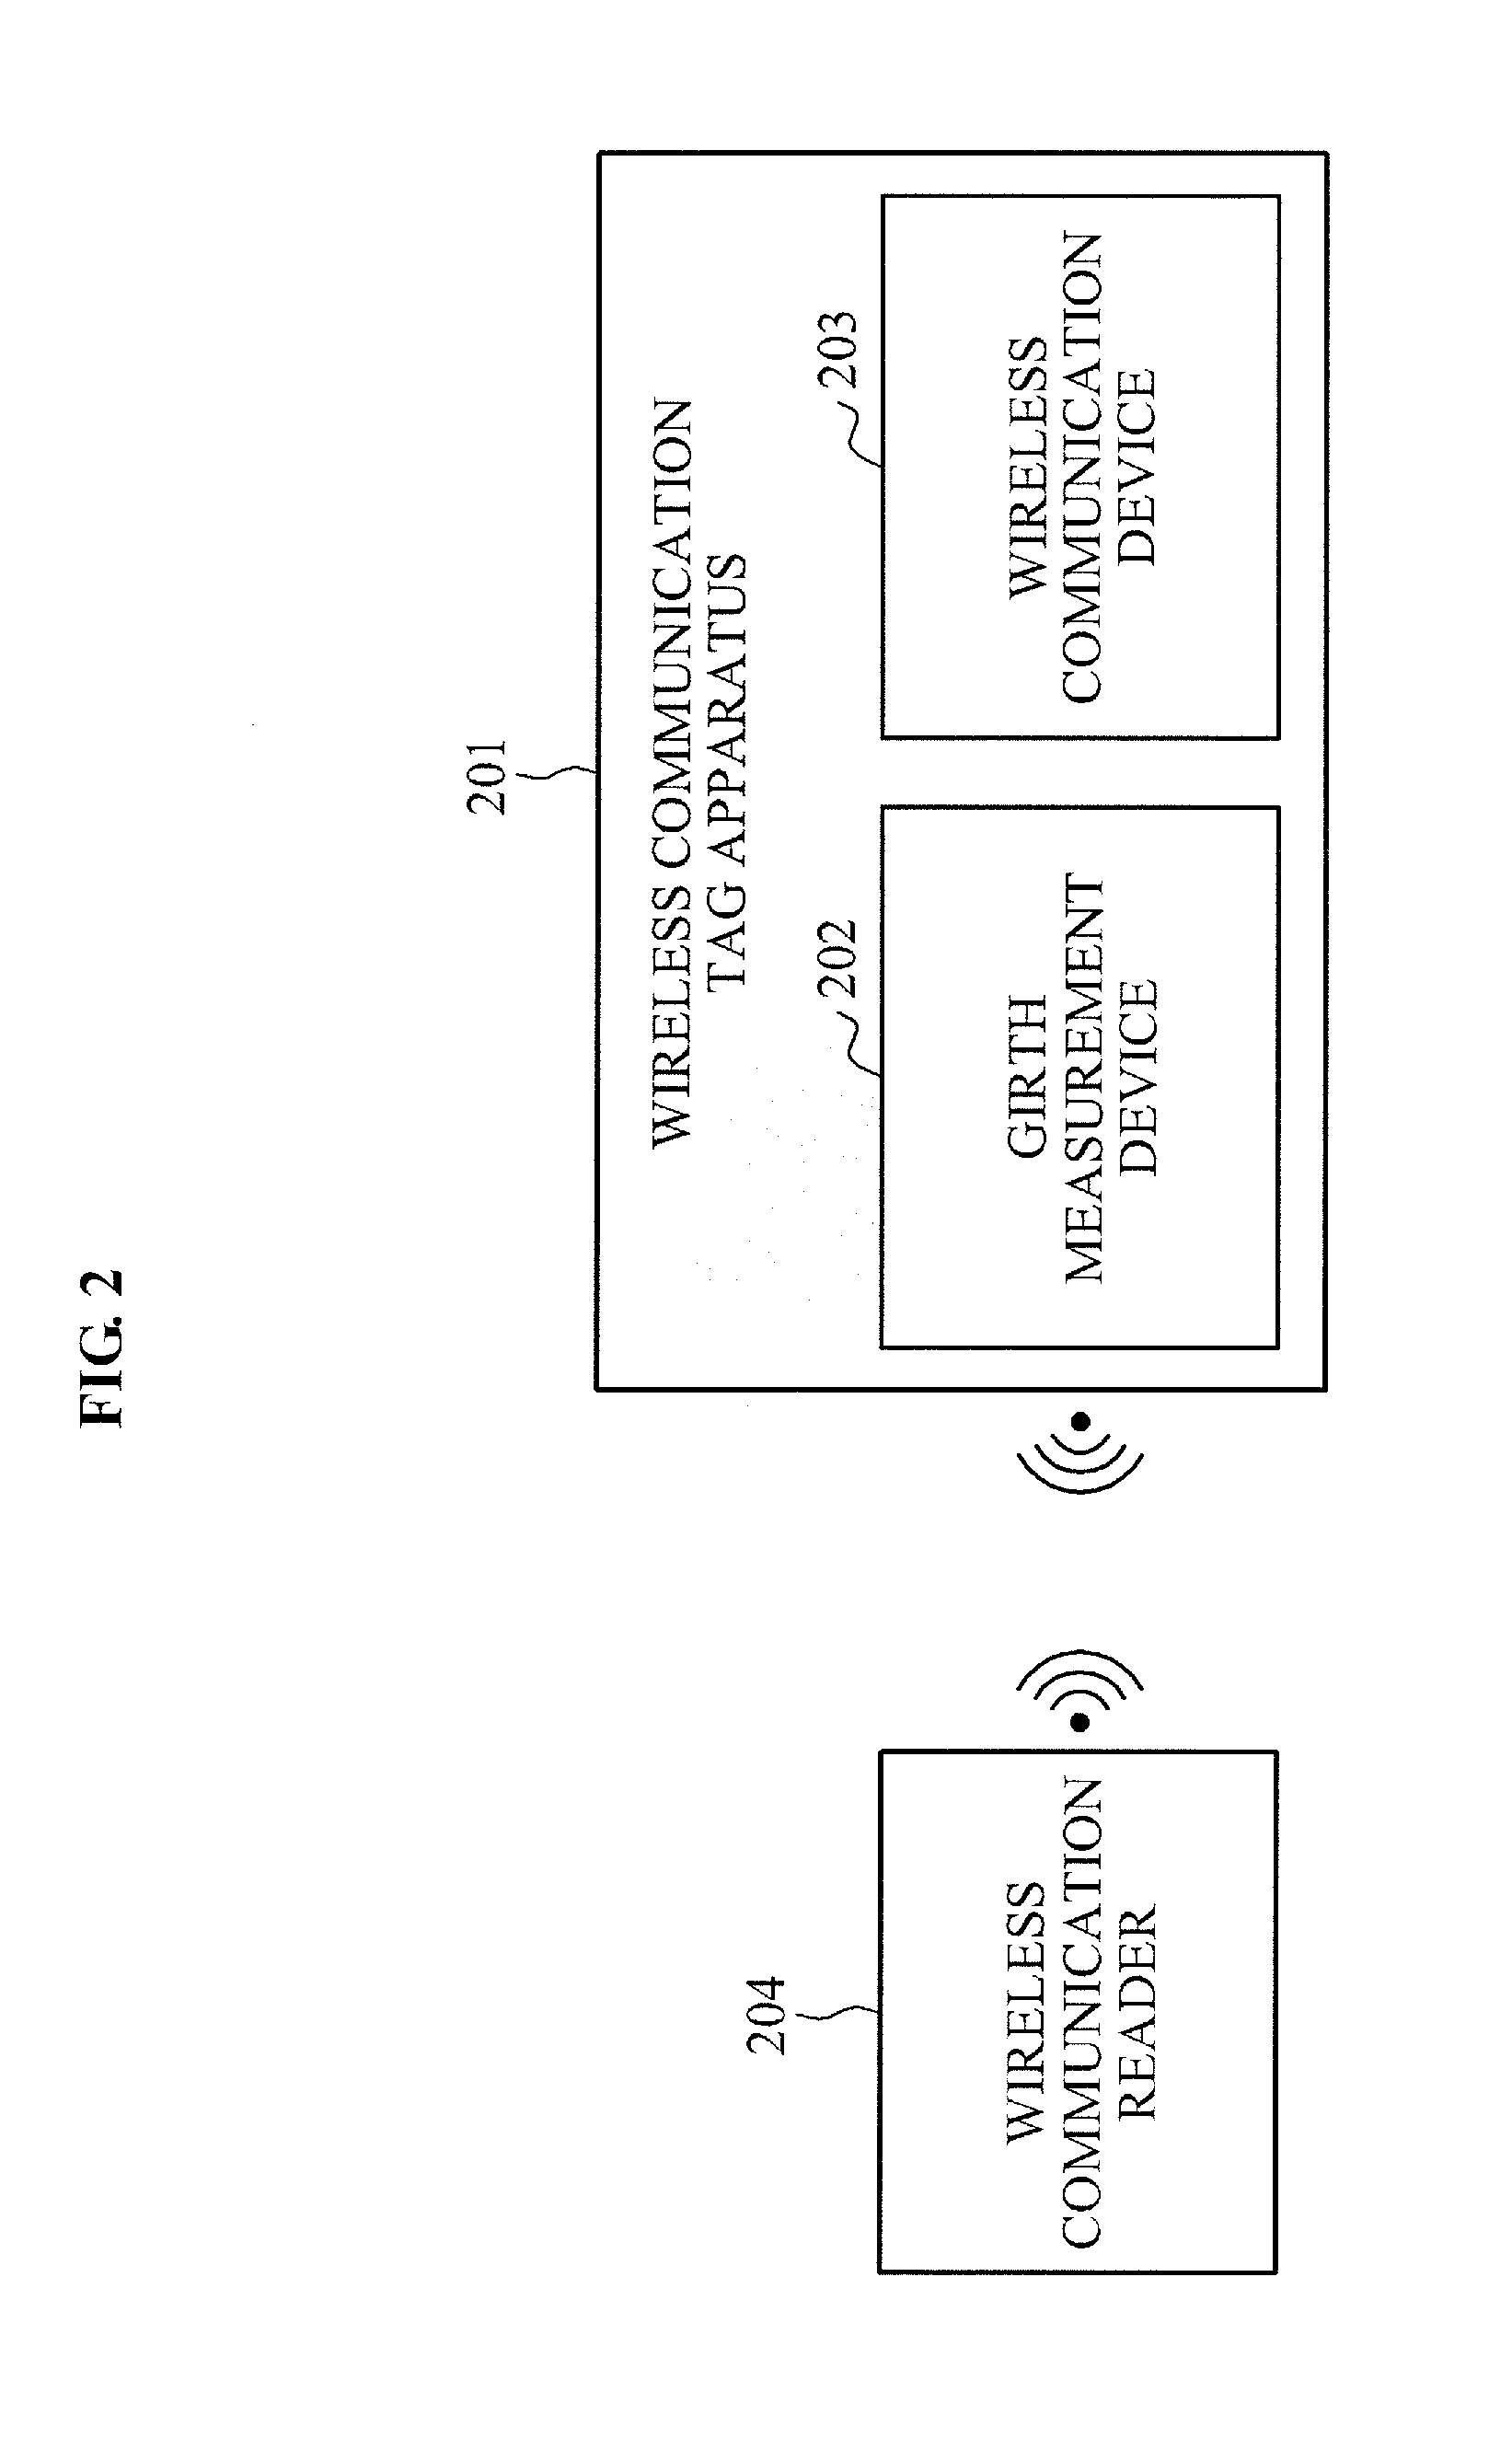 Girth measuring device and method for measuring girth of tree, and wireless communication tag apparatus including girth measuring device